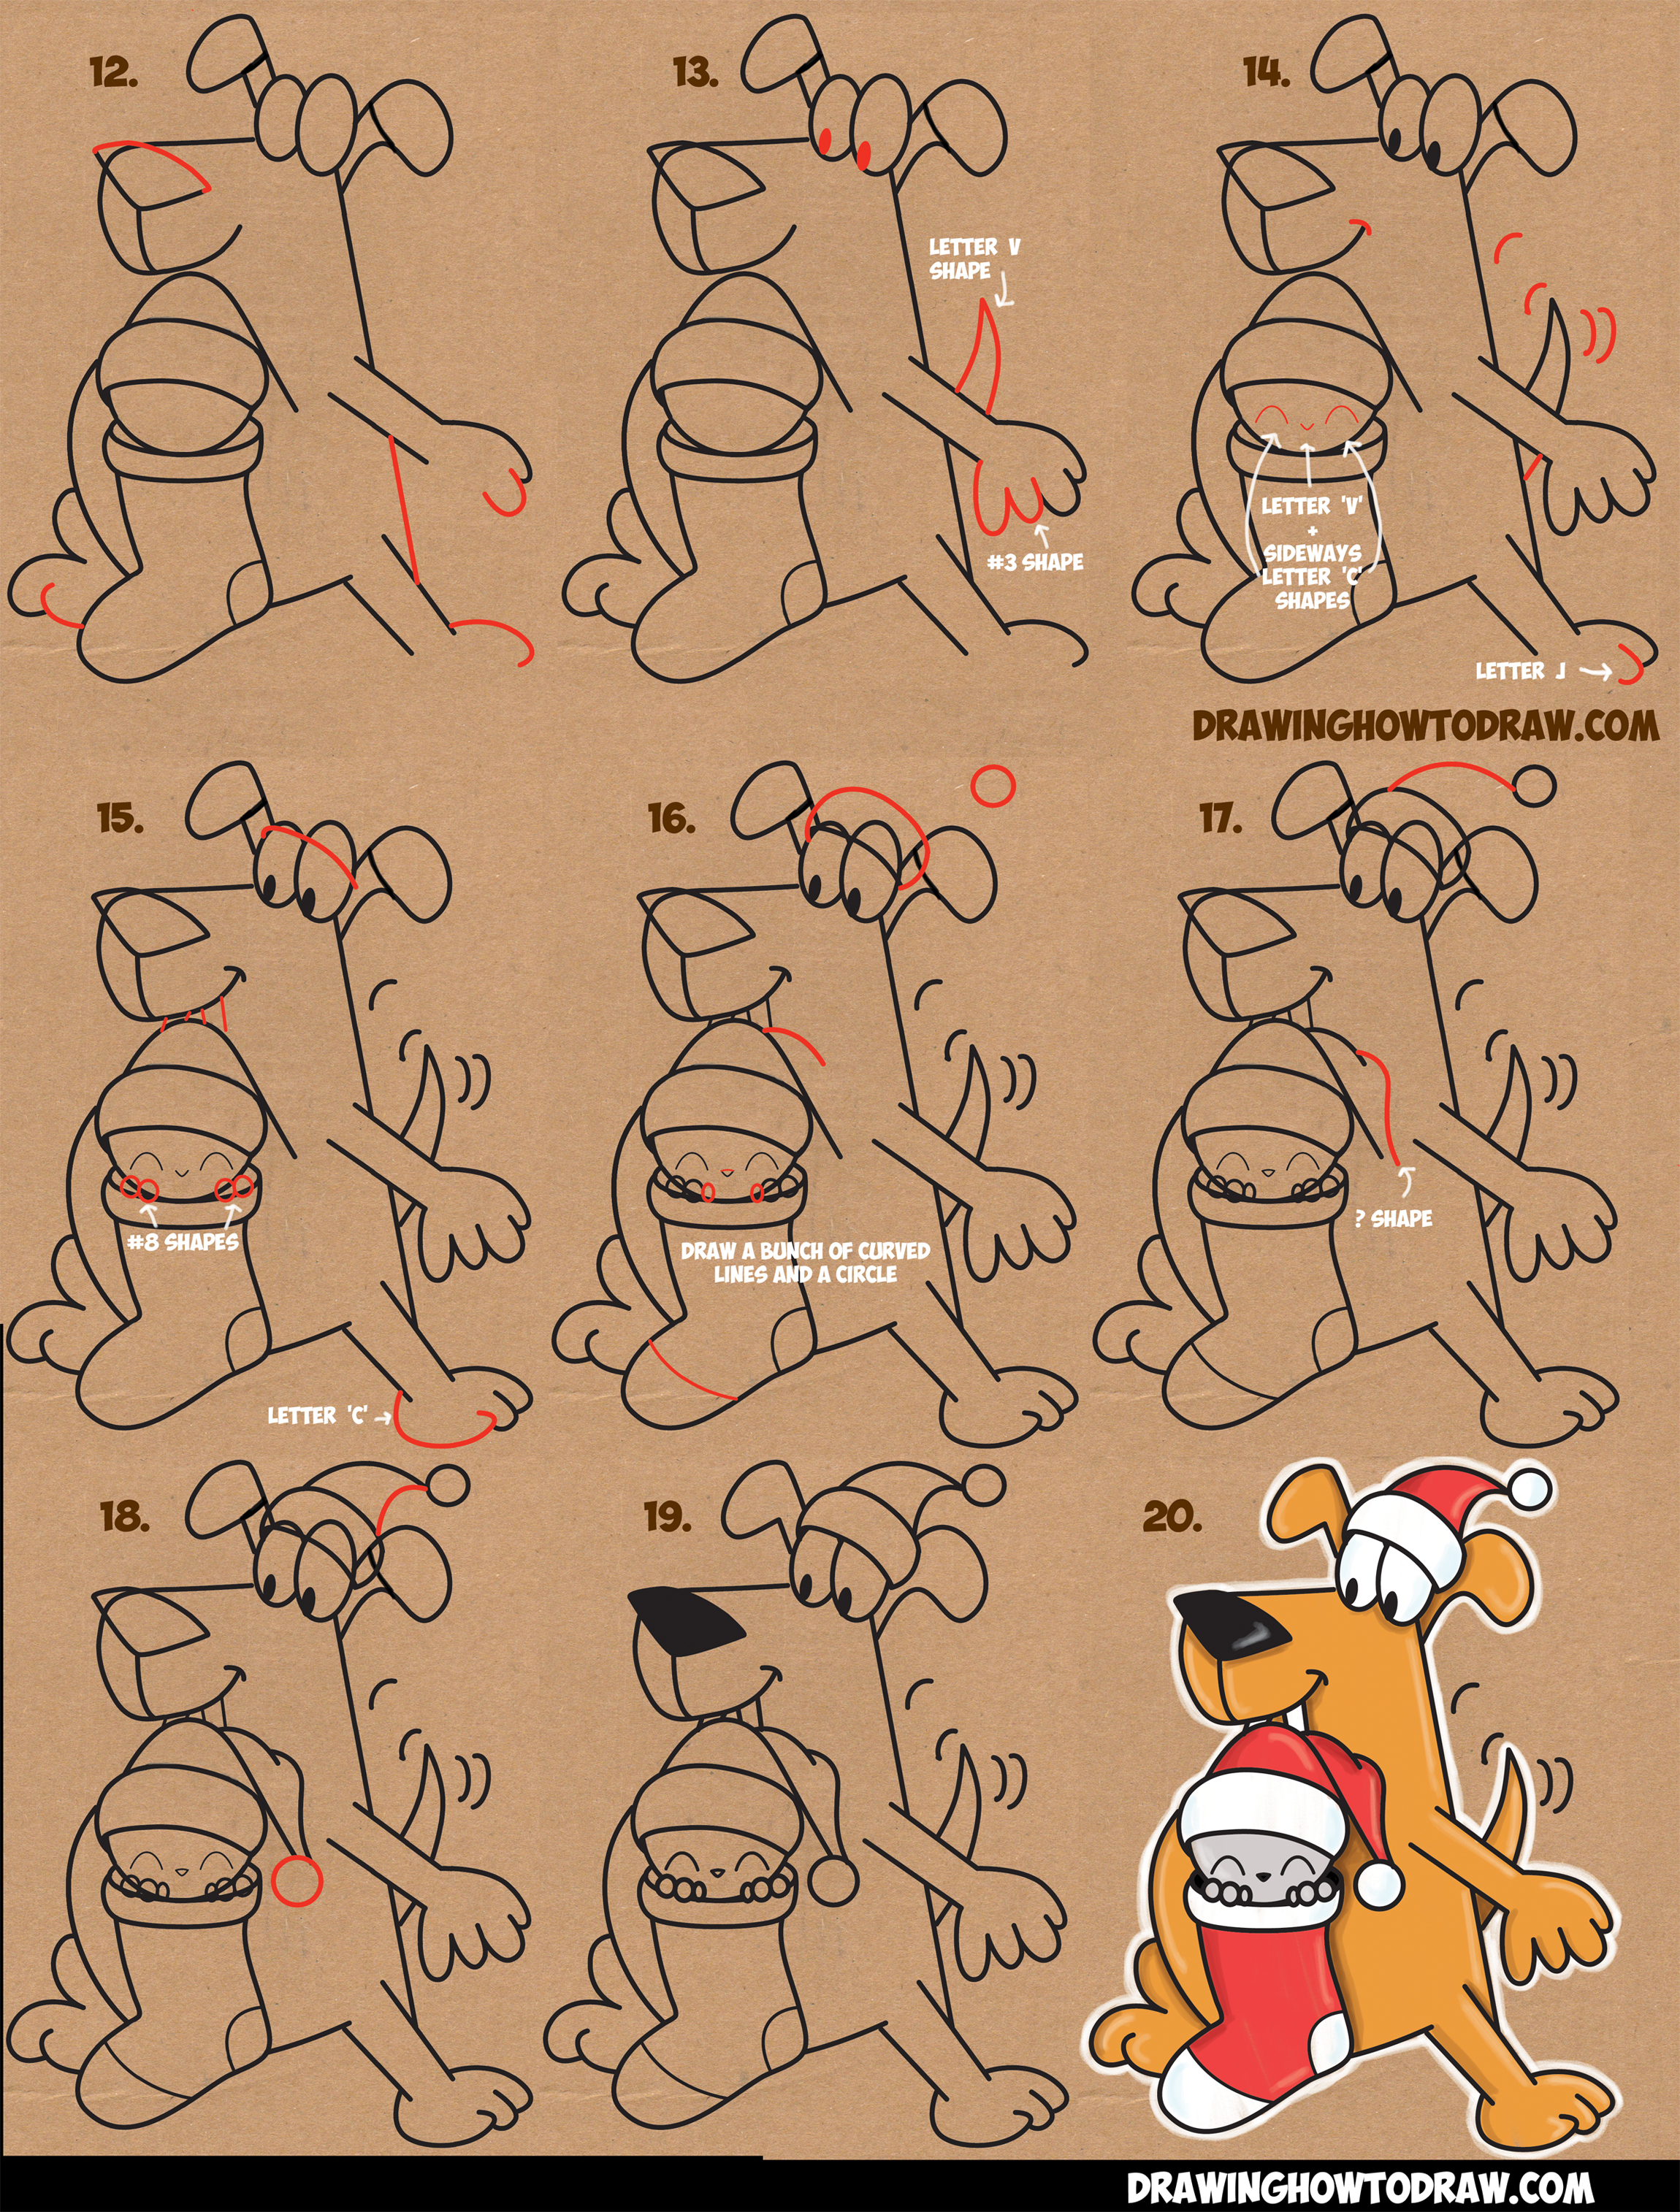 Learn How to Draw a Cartoon Dog Holding a Cute Kawaii Kitten / Cat in a Christmas Stocking - Simple Steps Drawing Lesson for Children and Beginners